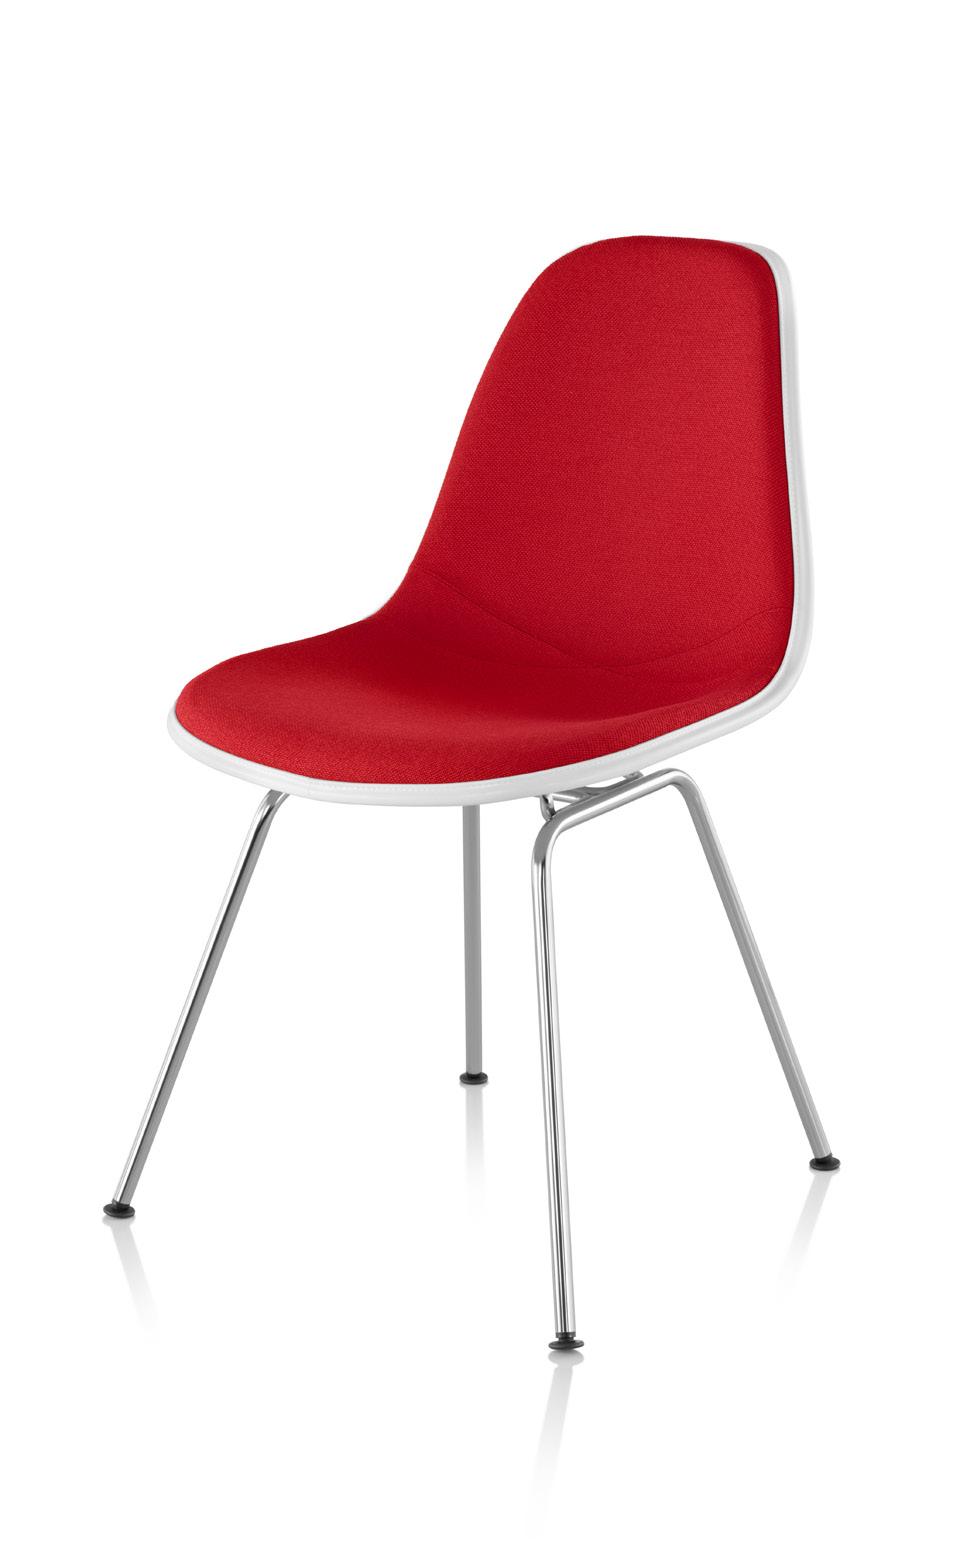 Eames Upholstered Molded Plastic Side Chair 4-Leg Base 16% recycled content; 84% recyclable Exemplifying the designers mantra of the best for the most for the least, molded plastic side chair